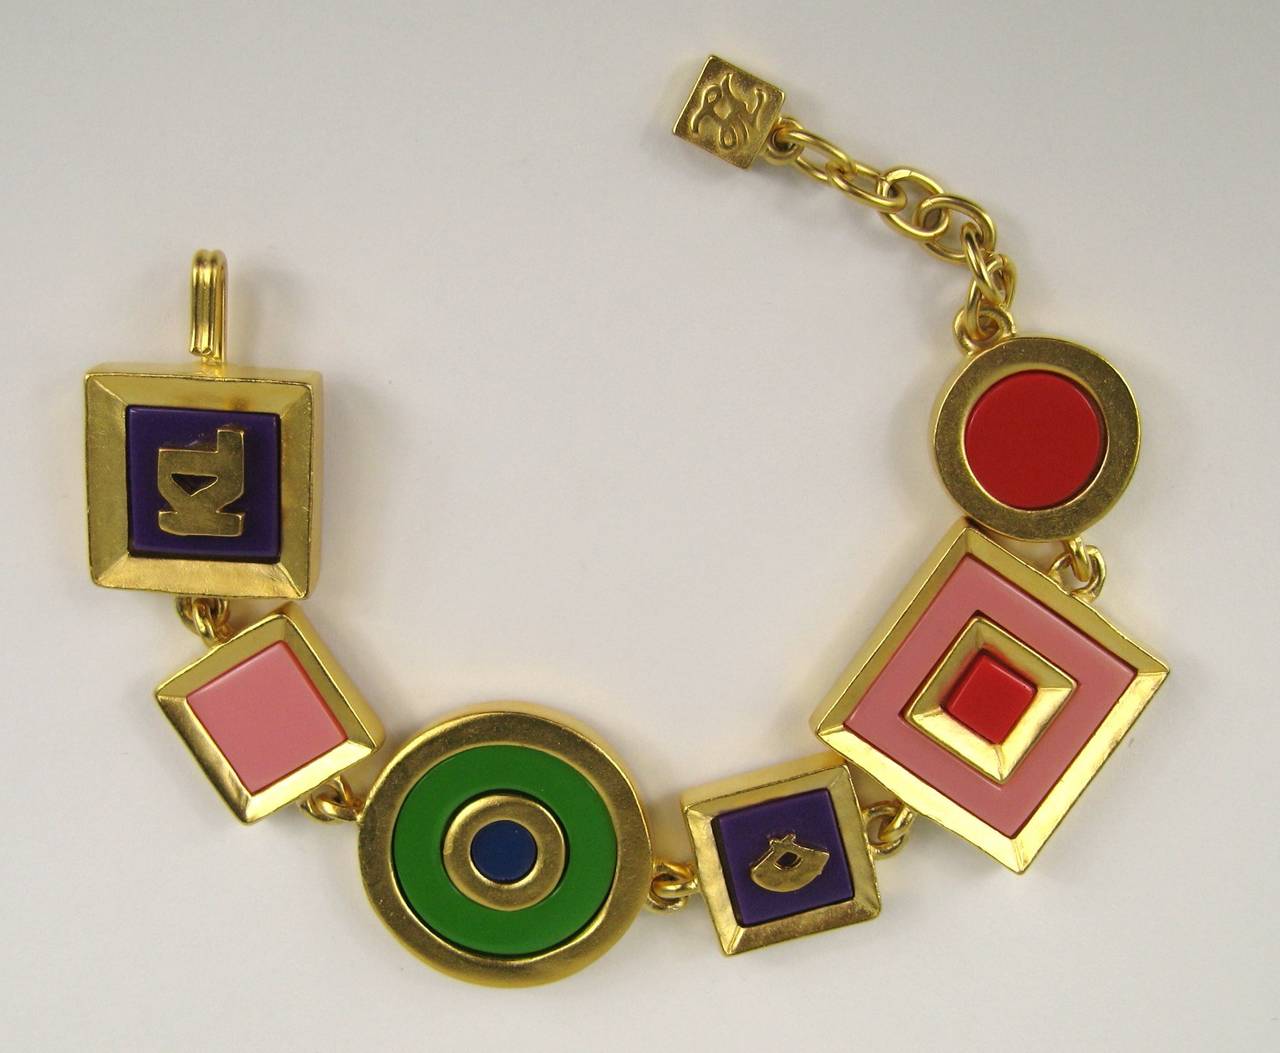 New, Never Worn vintage 1980s Lagerfeld Bracelet. This from a  4 piece Set, all listed on our storefront. Necklace, Earrings, charm Bracelet and Bangle all up! 9 inches end to end ** 2 inch extension  Bracelet will fit a 6-7.5 wrist nicely. This is